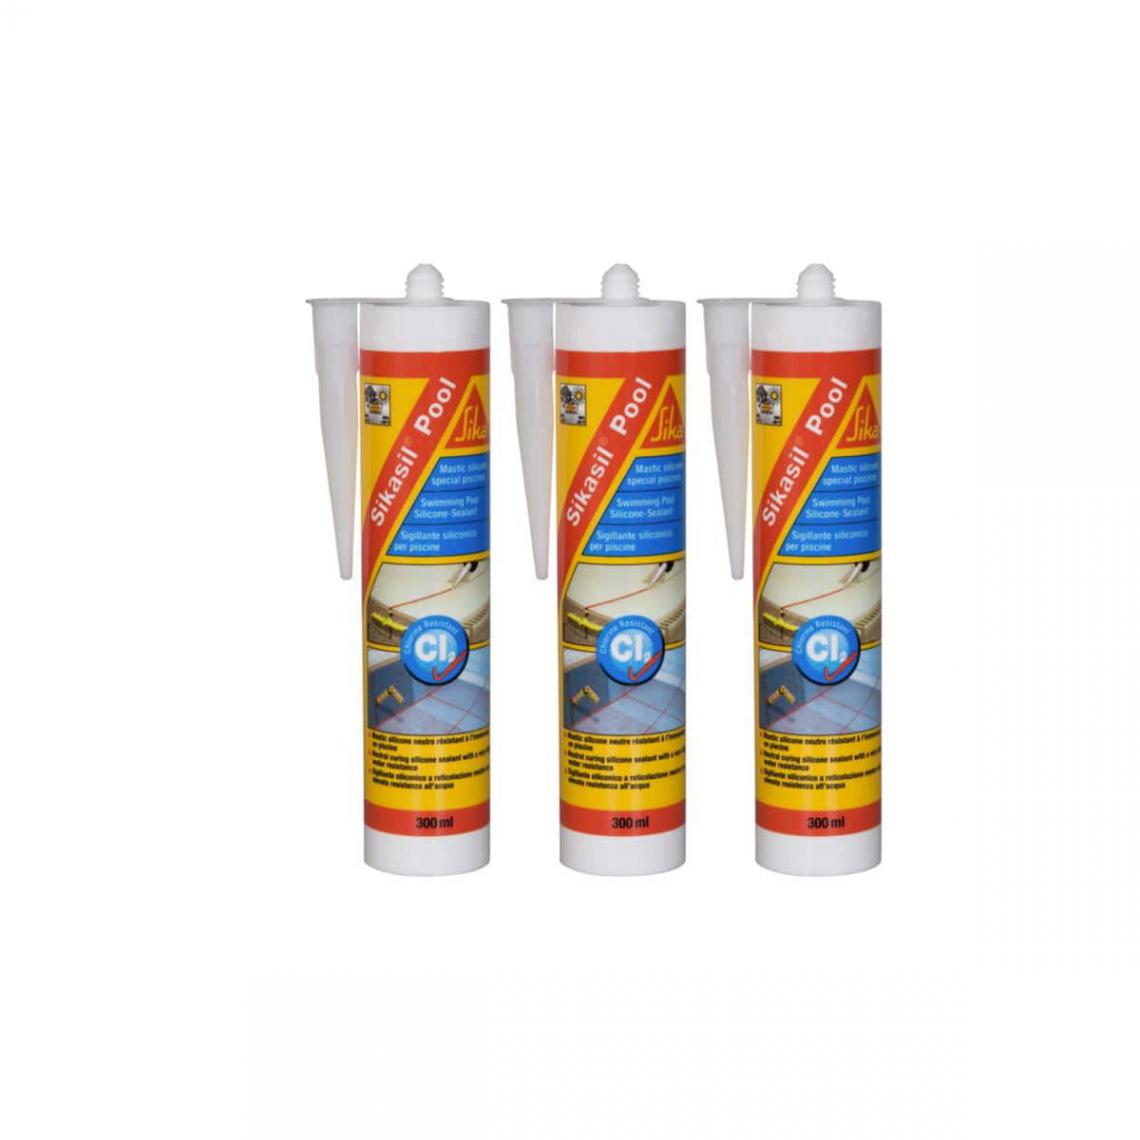 Sika - Lot de 3 mastic silicone SIKA Sikasil Pool - Joint pour piscine transparent - 300ml - Mastic, silicone, joint